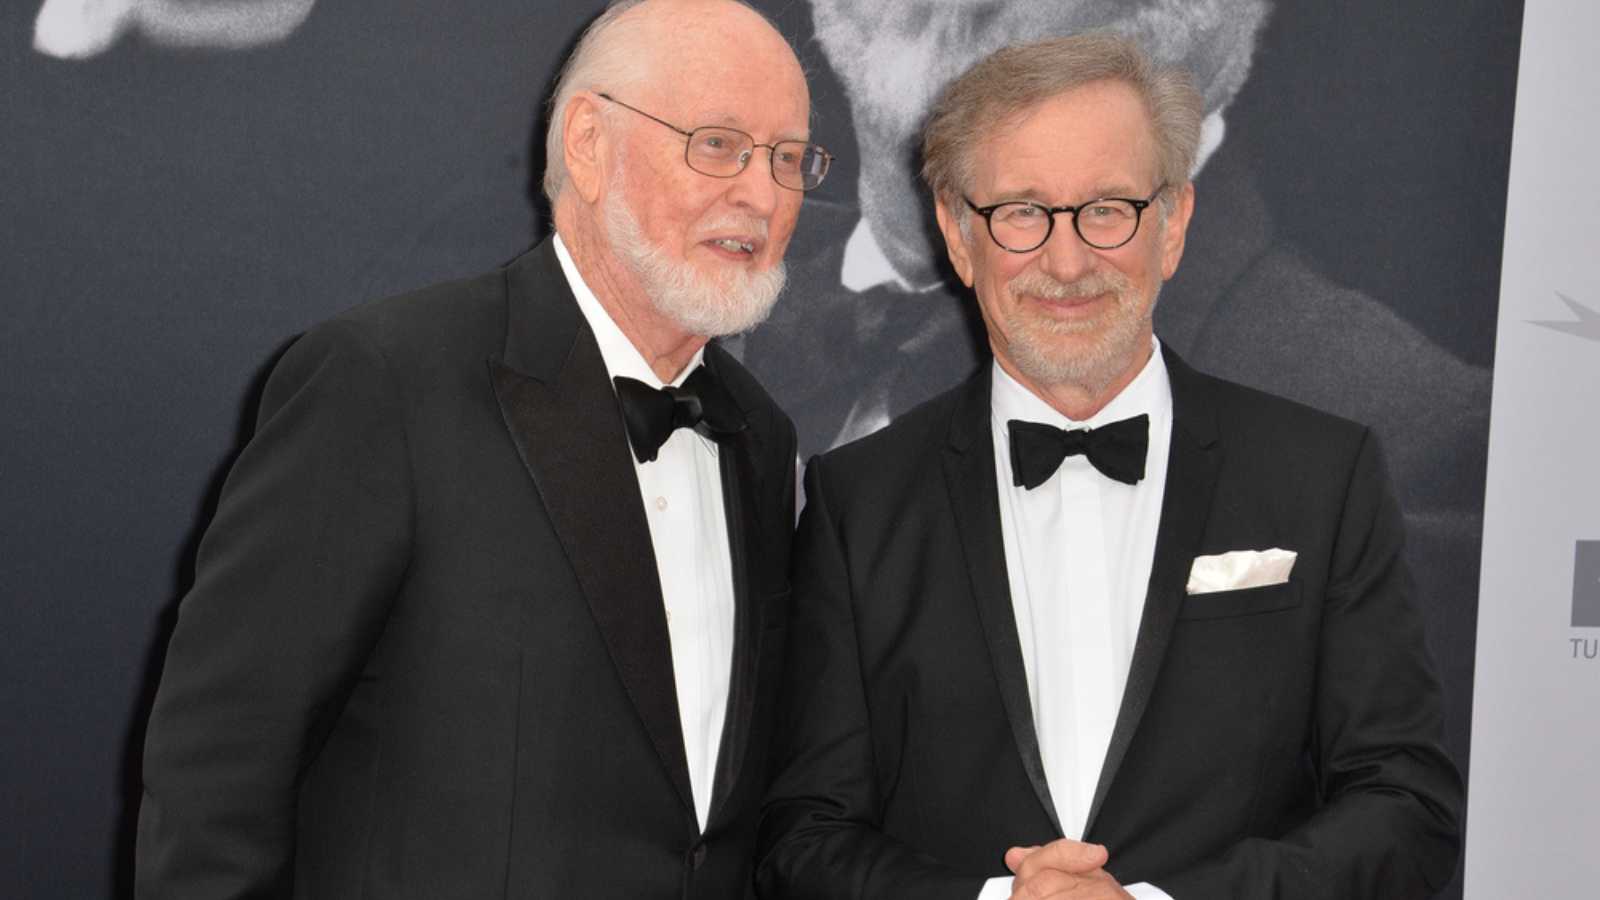 LOS ANGELES, CA. June 9, 2016: Composer John Williams & director Steven Spielberg at the 2016 American Film Institute Life Achievement Award gala honoring John Williams at the Dolby Theatre, Hollywood